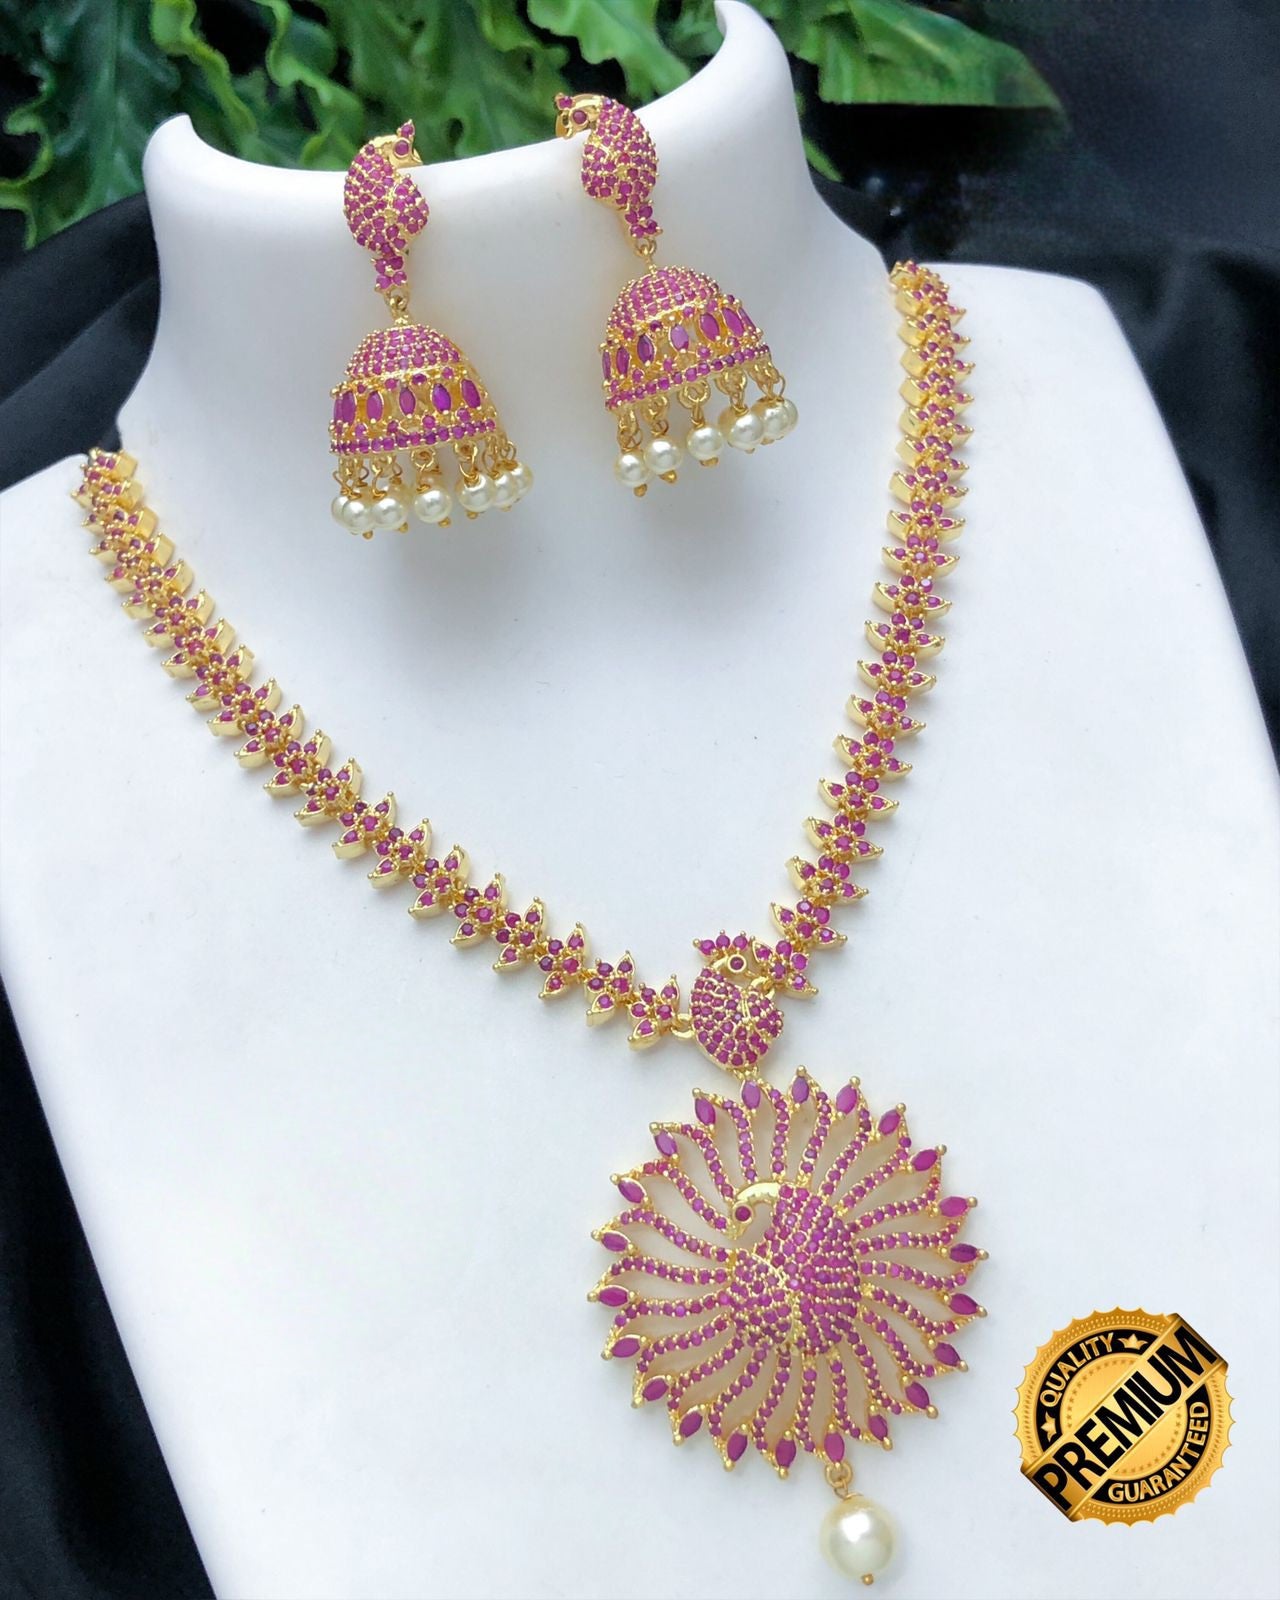 Gold plated American Diamond Dancing Peacock Pendant Necklace Jhumka Earring set|South Indian jewelry|AD necklace set| Ruby Emerald jewelry